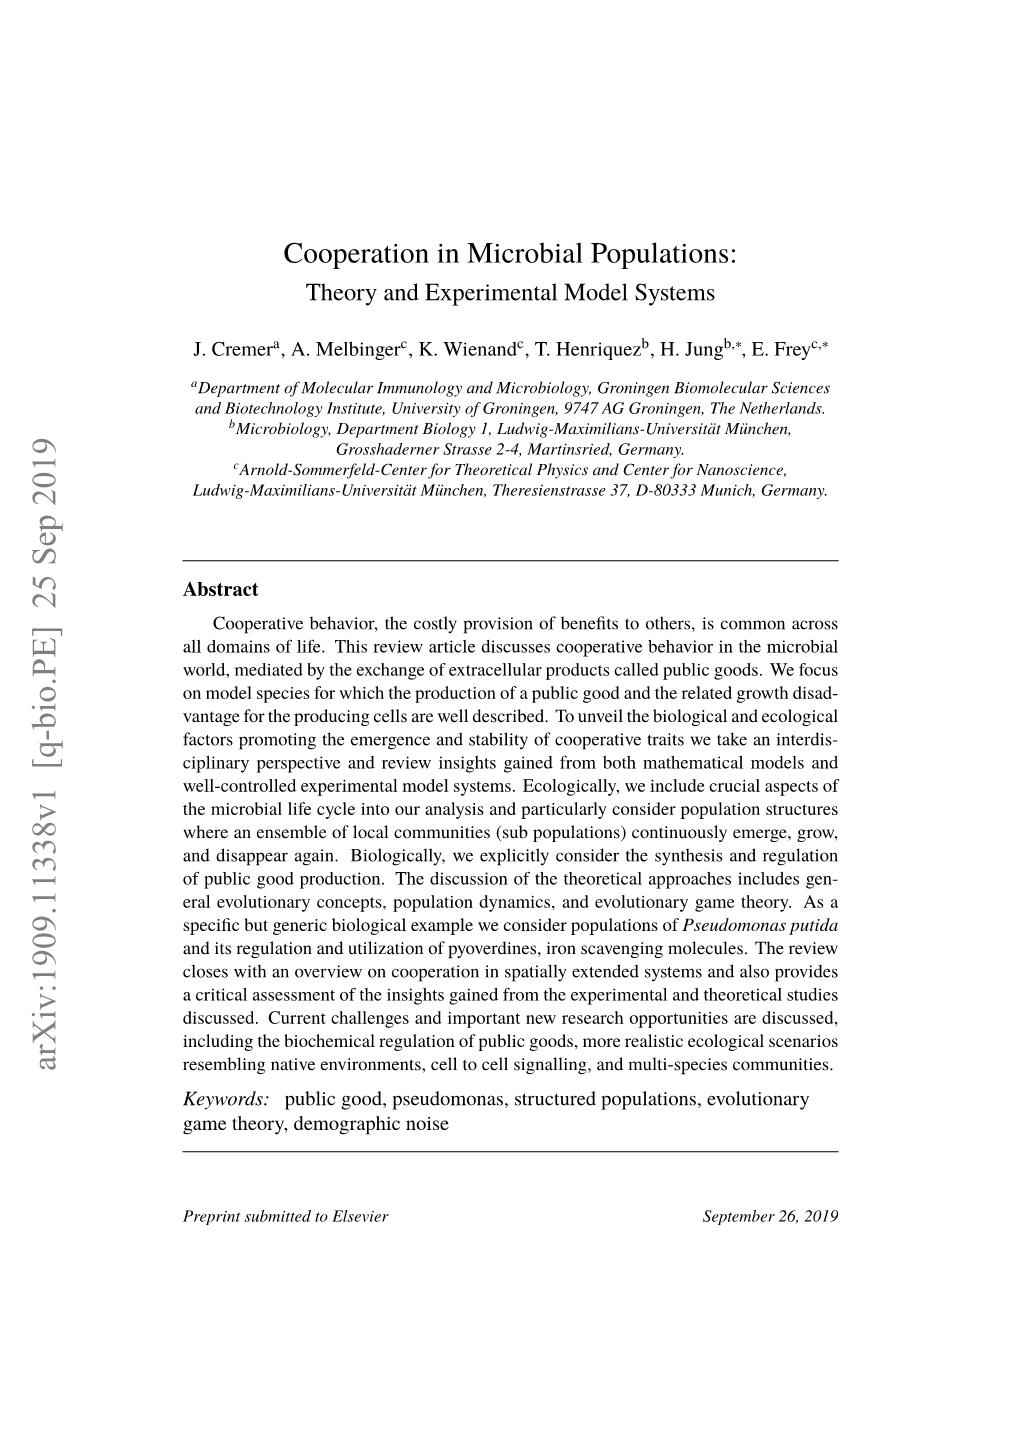 Cooperation in Microbial Populations: Theory and Experimental Model Systems